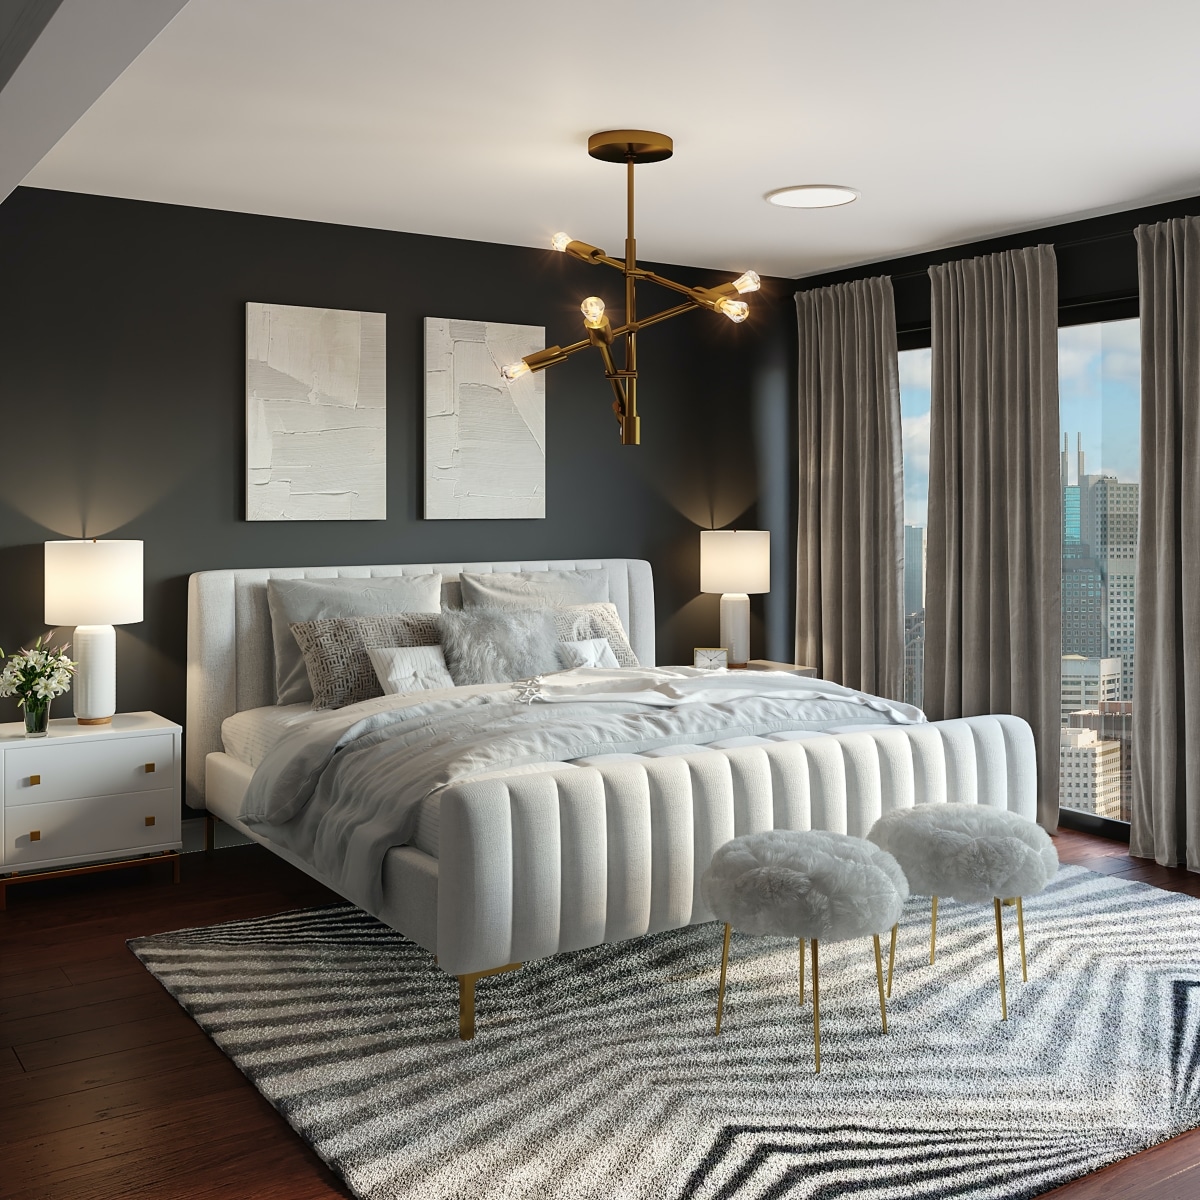 bedroom with black and white interior